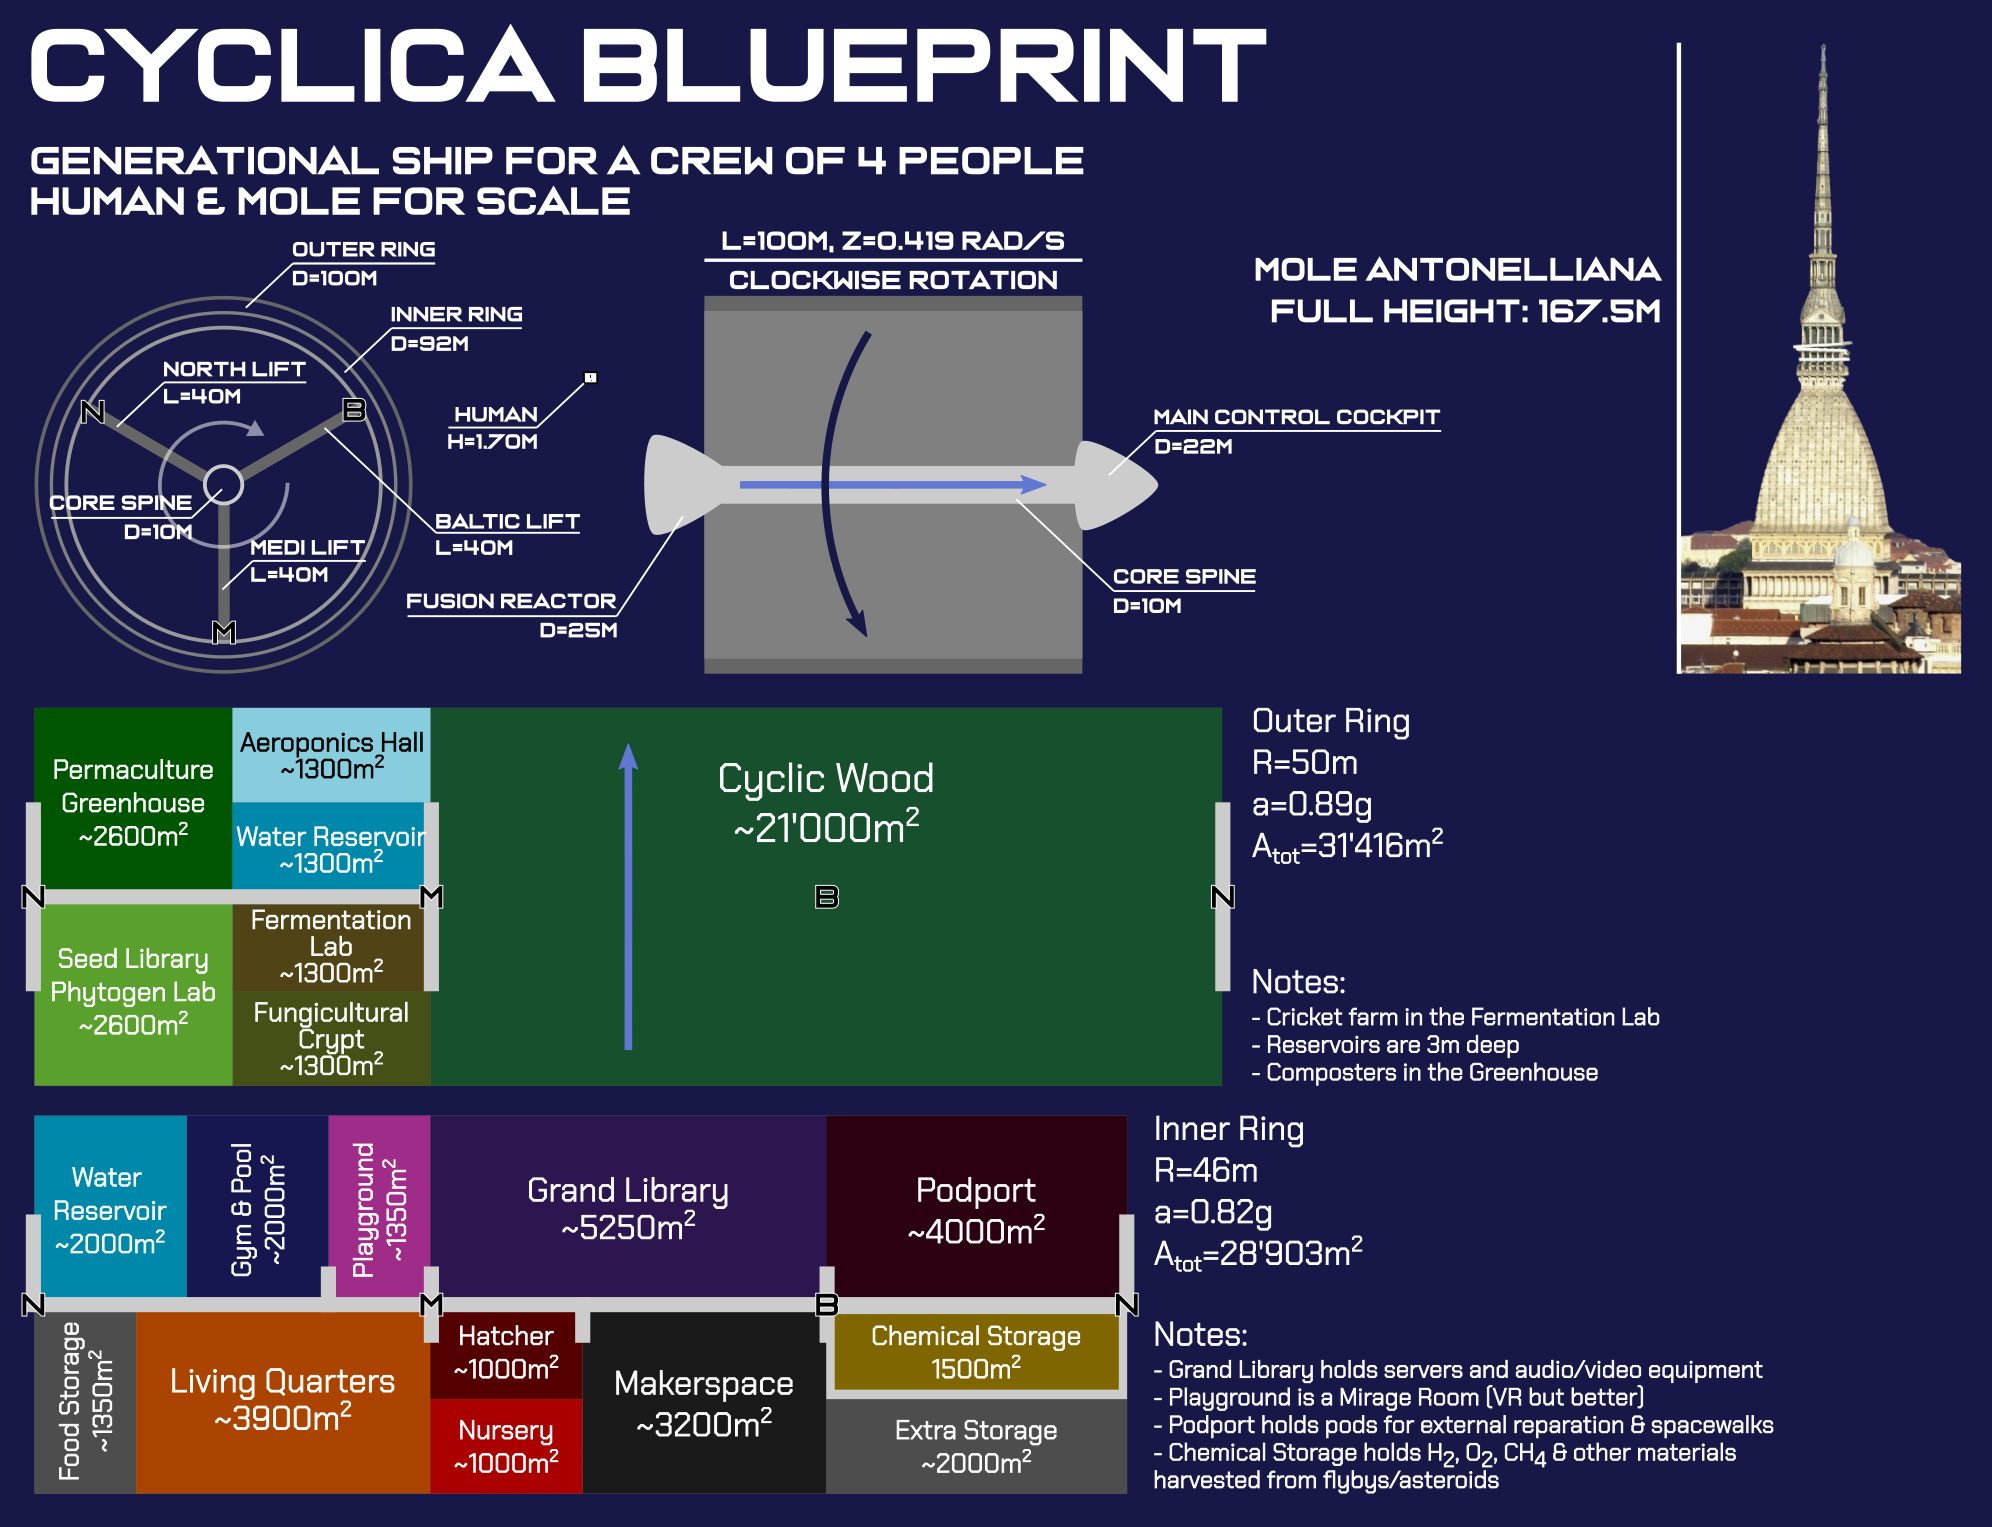 The blueprint of the spaceship Cyclica, with size comparisons, room labels and various measurements